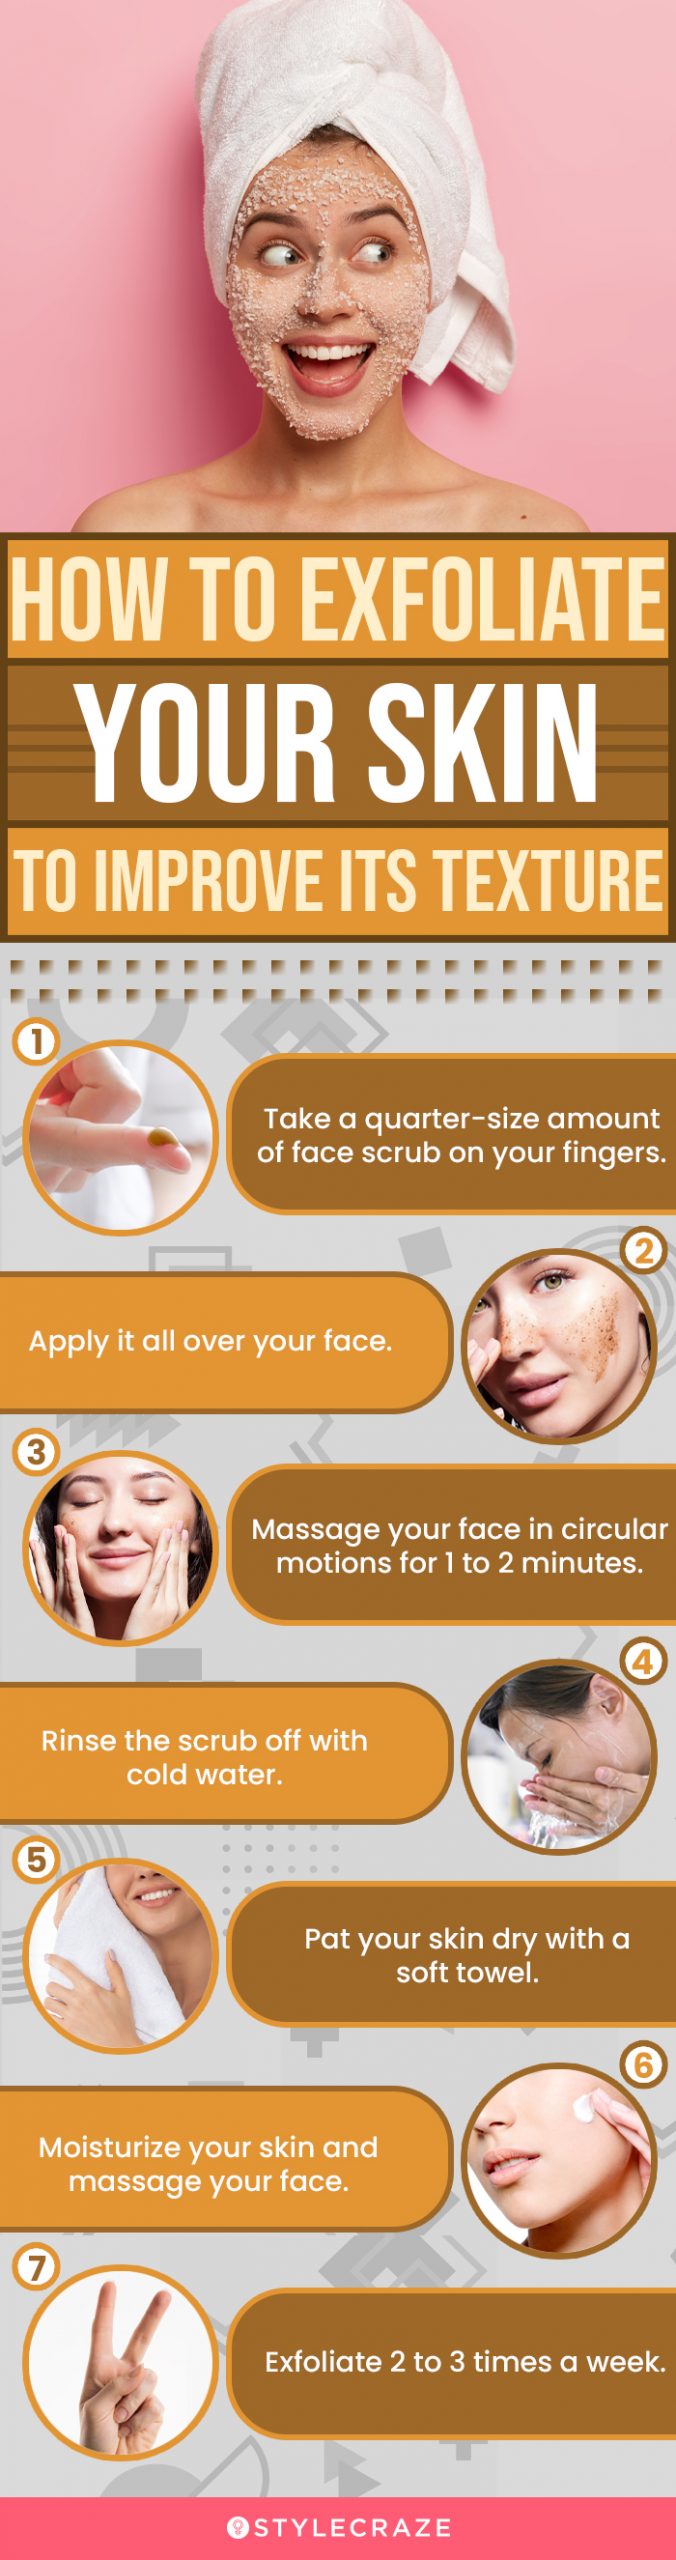  how to exfoliate your skin to improve its texture (infographic)